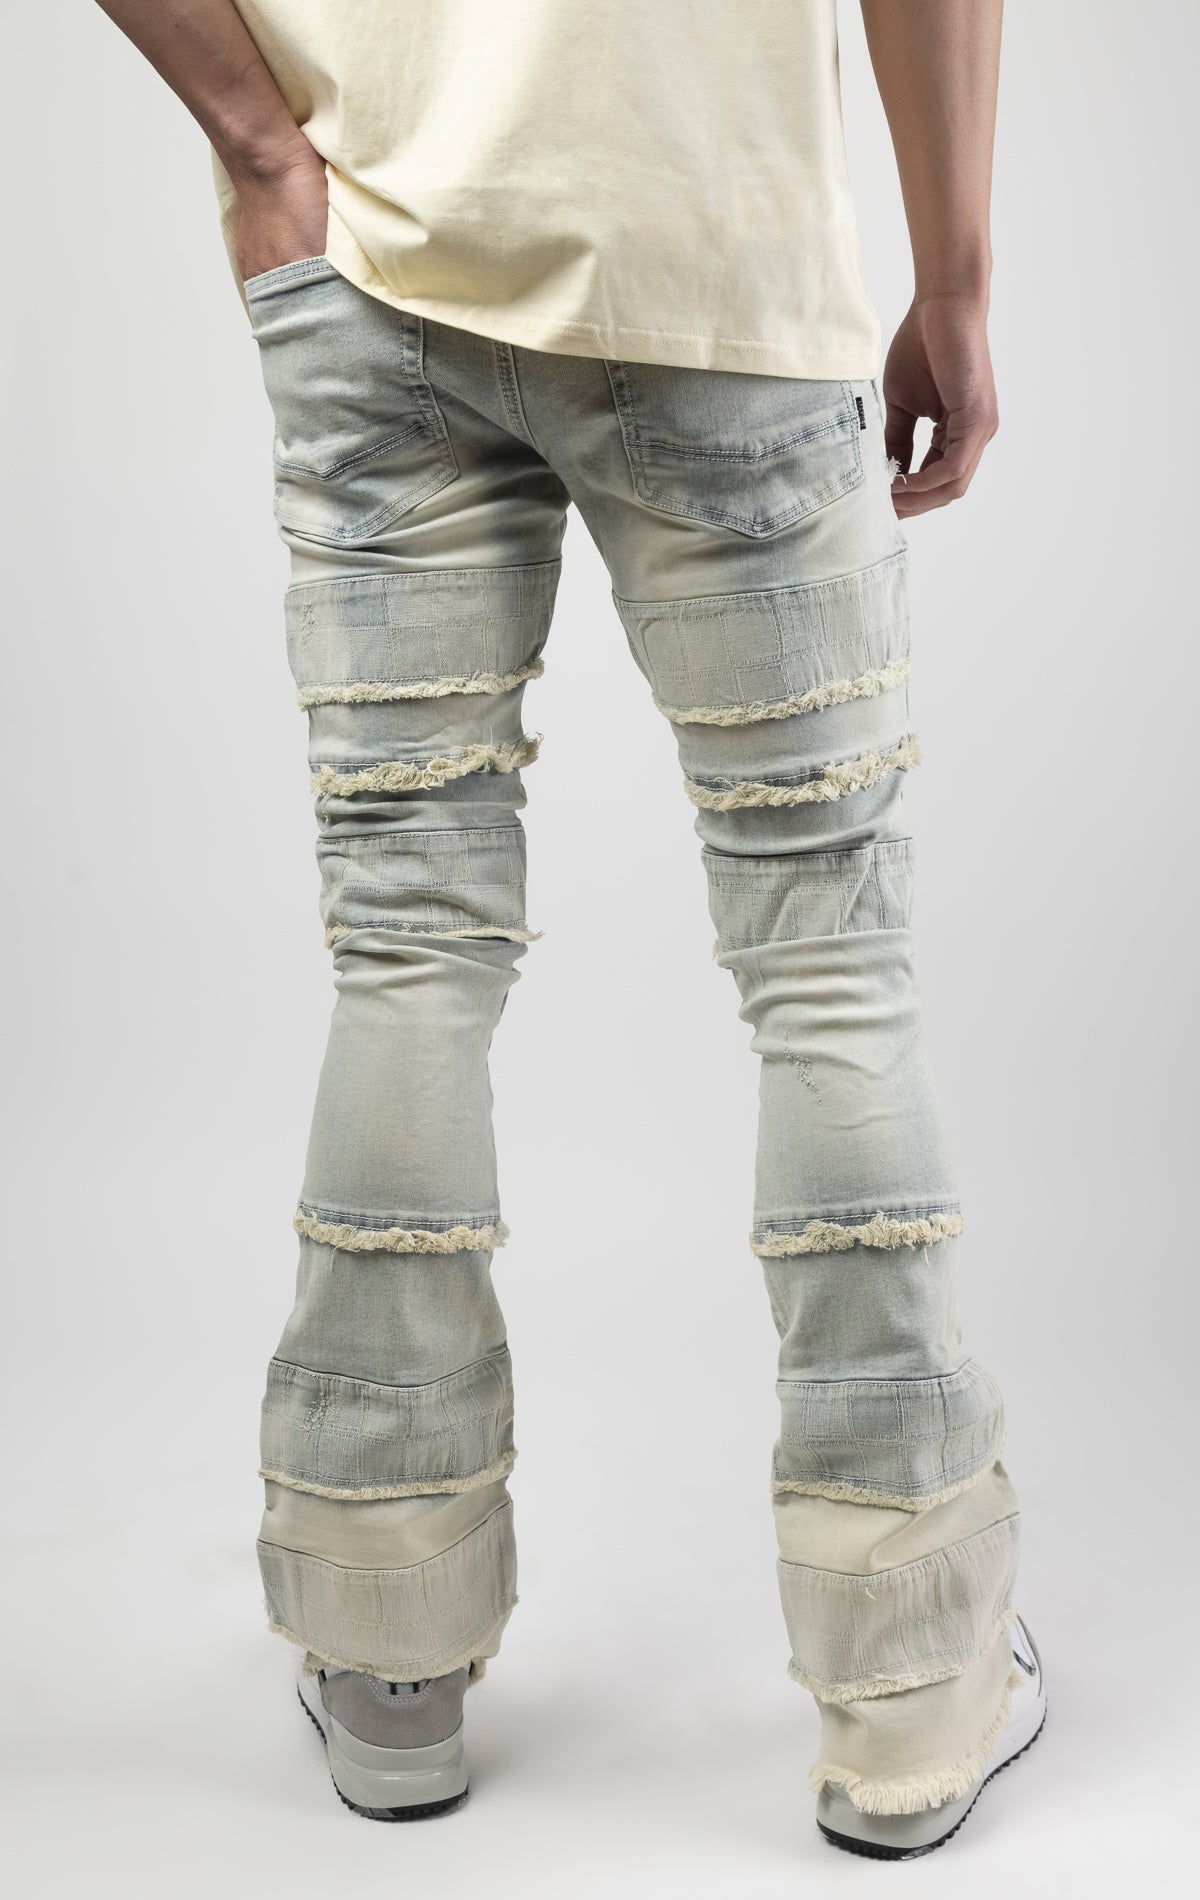 Light wash iconic stacked jeans crafted from high-quality, durable denim fabric consisting of 98% cotton and 2% spandex with a semi flare silhouette and a length of 35"-37". Featuring a distinctive ripped and repair design with pocket patches and a multi-tone dye throughout, these urban-inspired pants are true to size